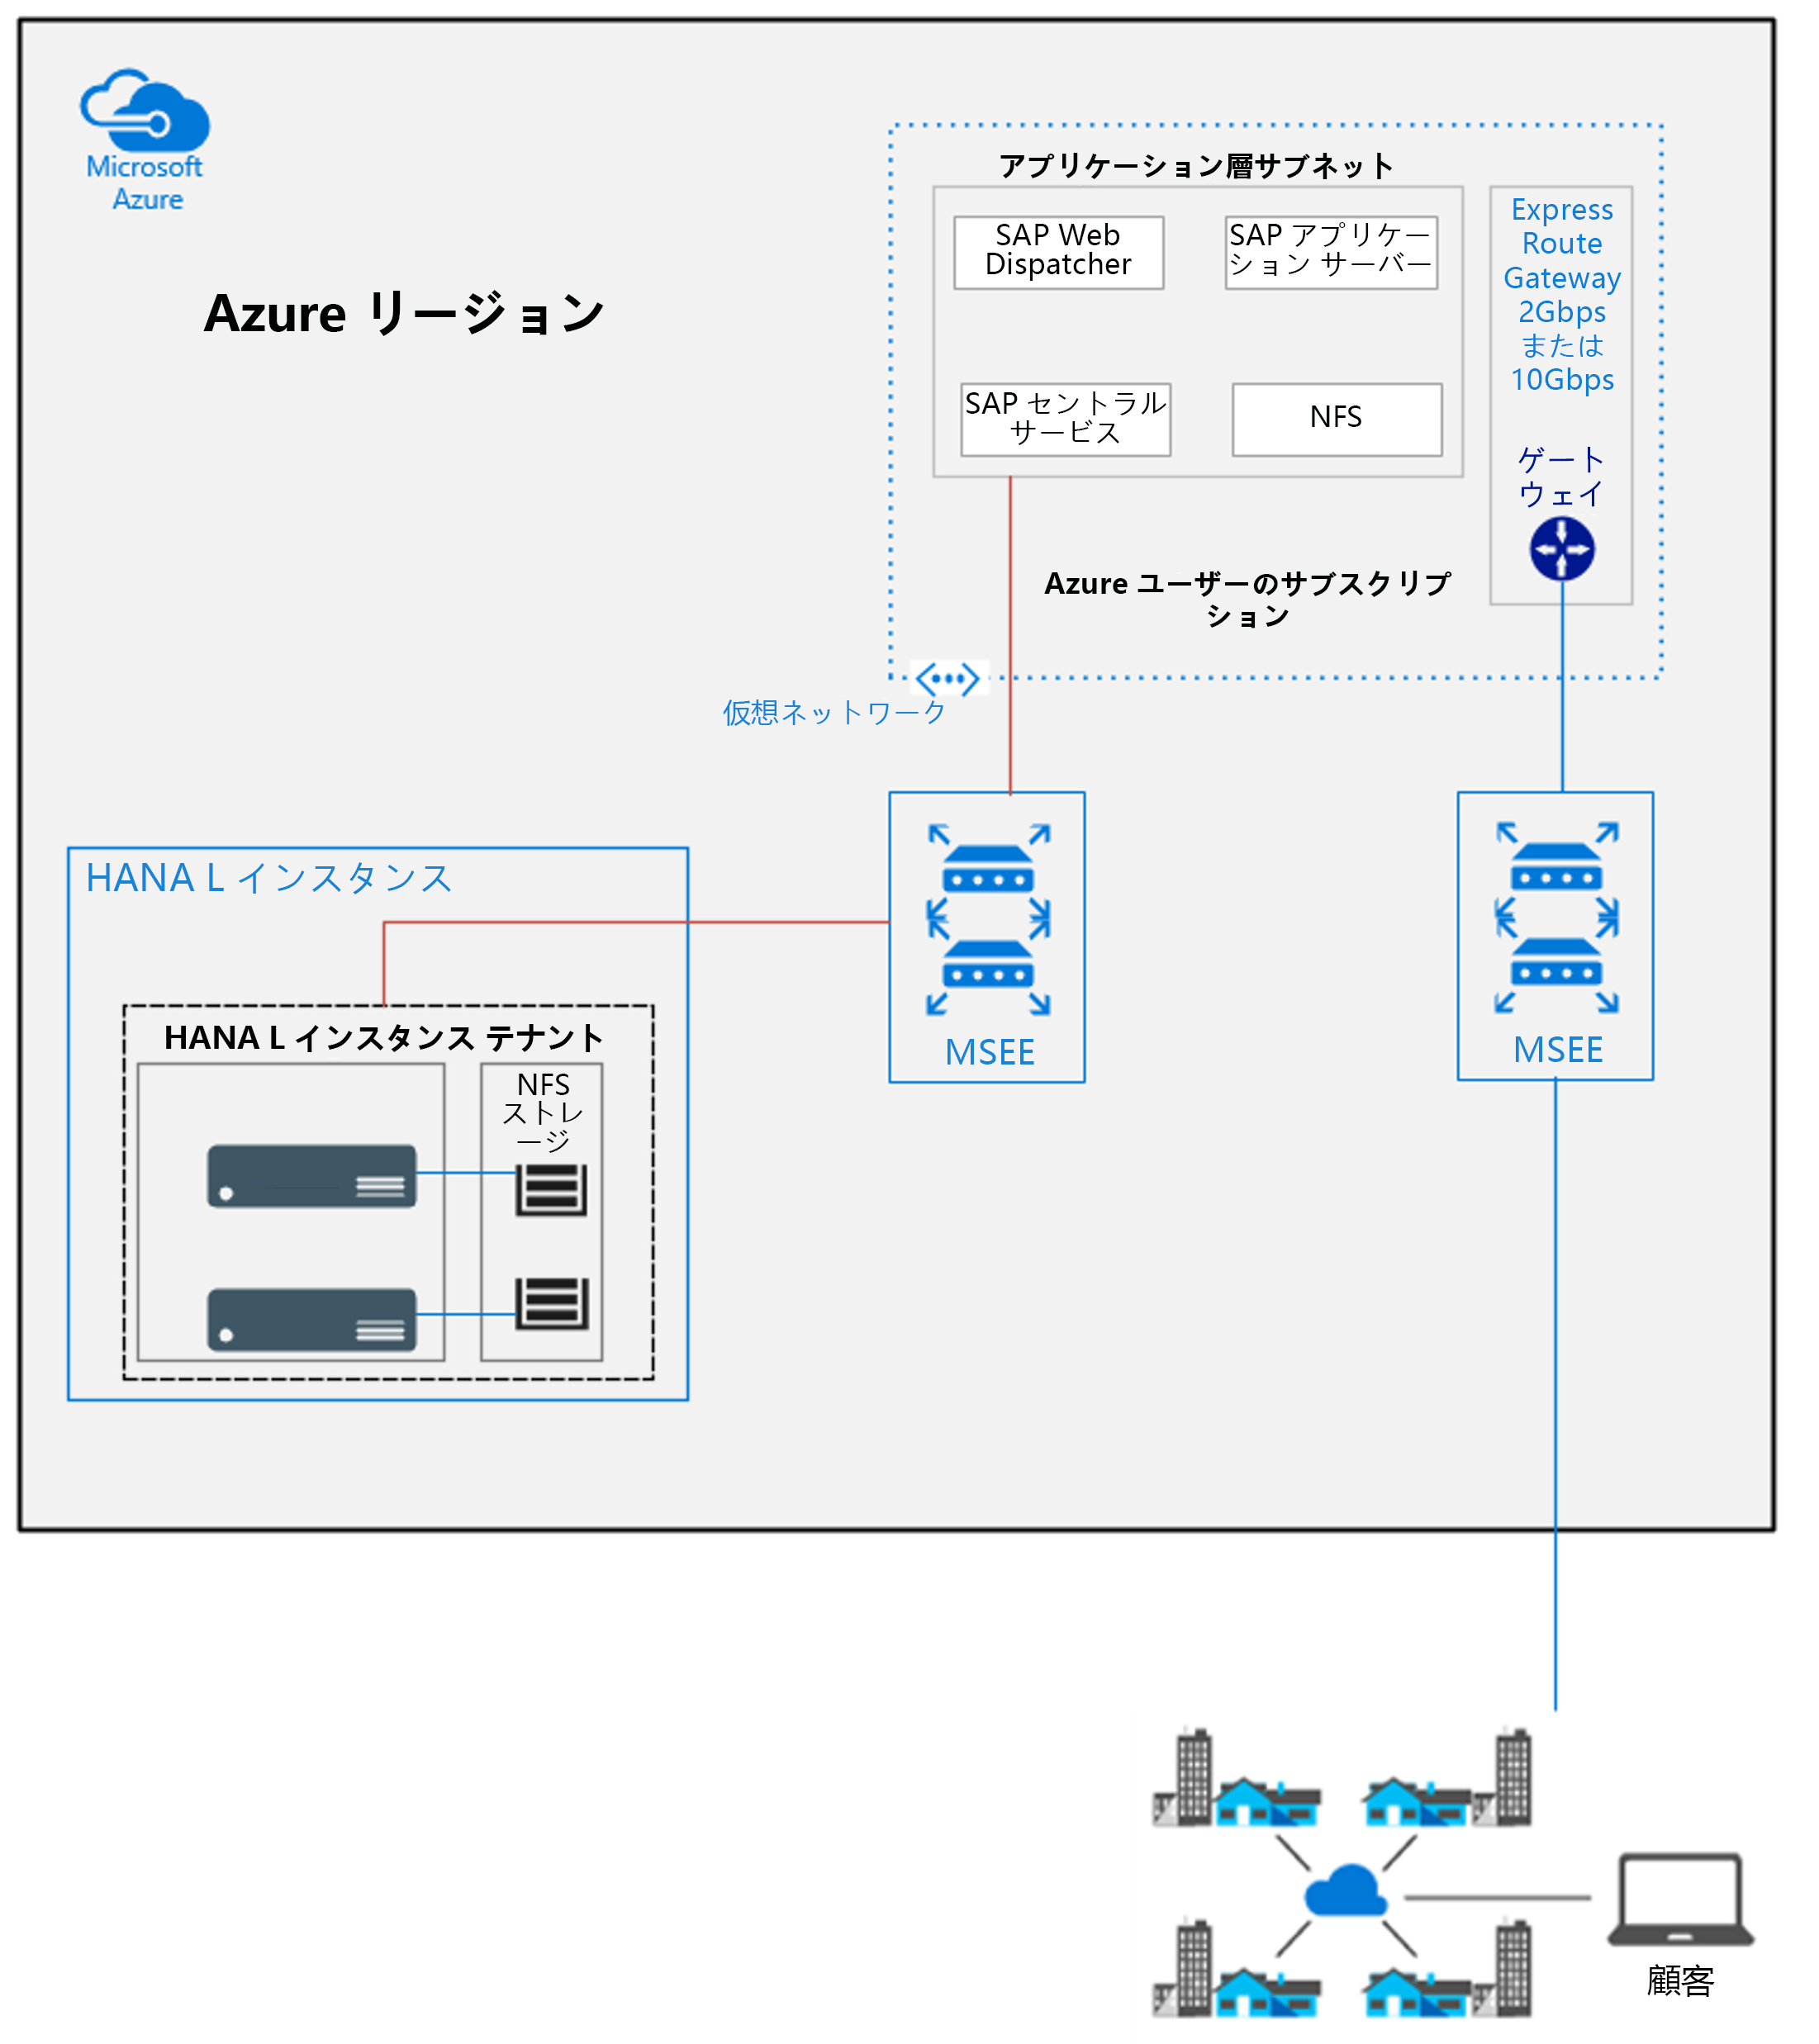 Diagram showing architectural overview of S A P HANA on Azure (Large Instances).